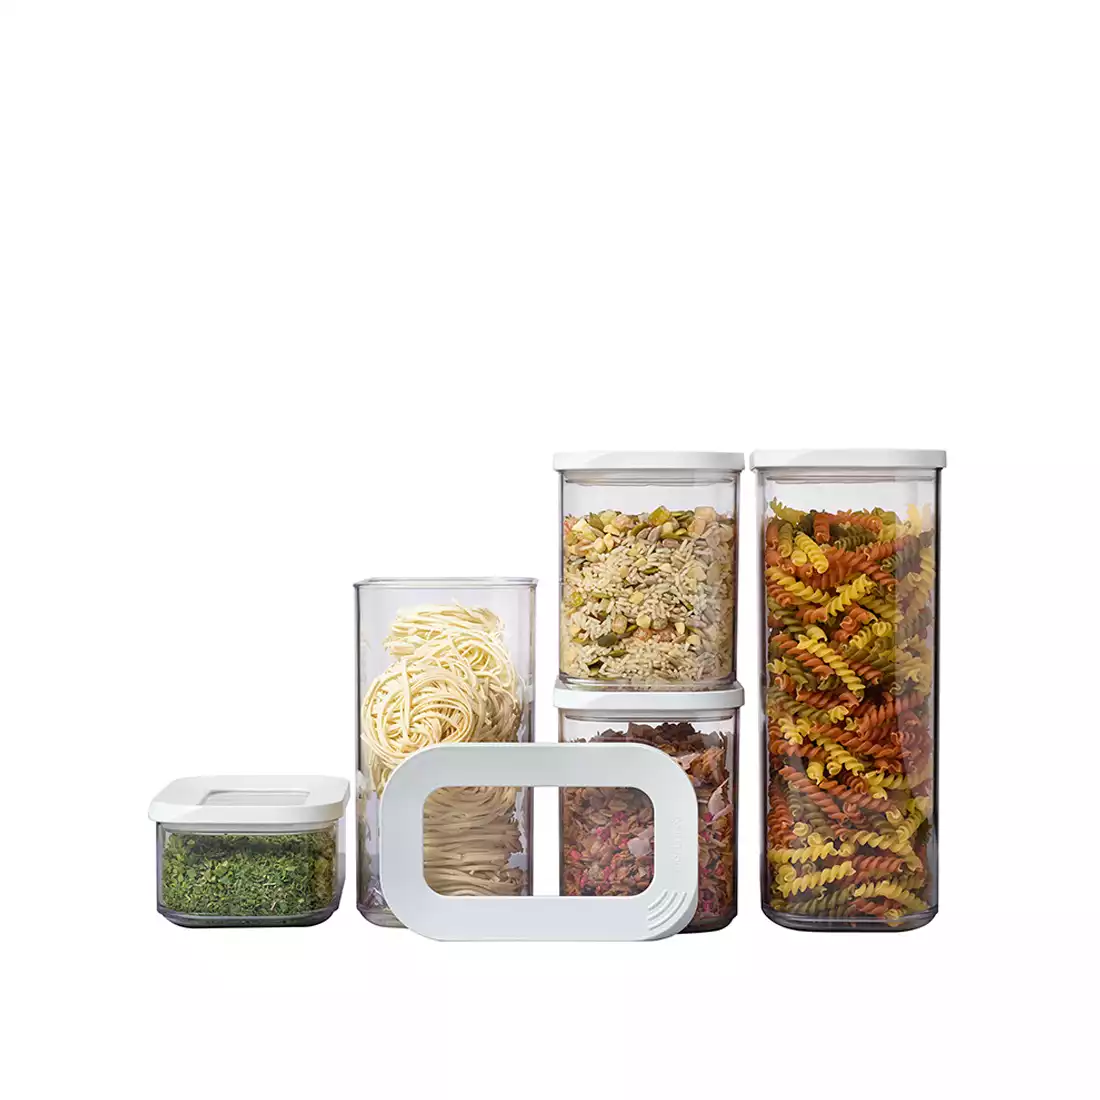 MEPAL MODULA set of 5 food containers, white